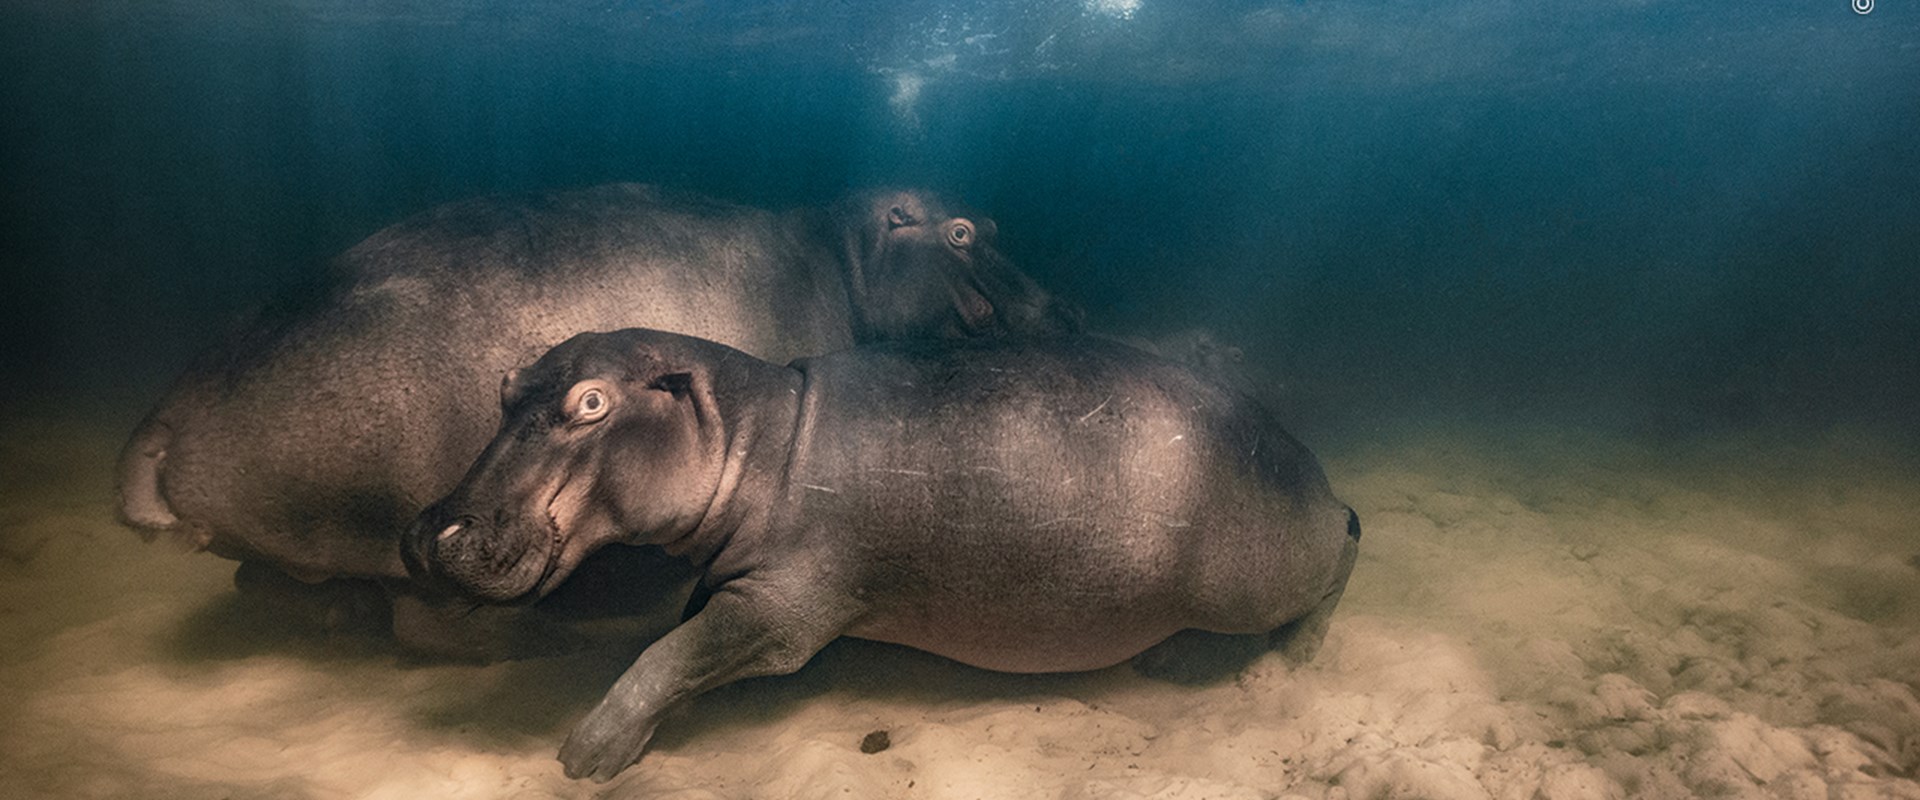 A hippopotamus and her two offspring resting in the clear water of a shallow lake.